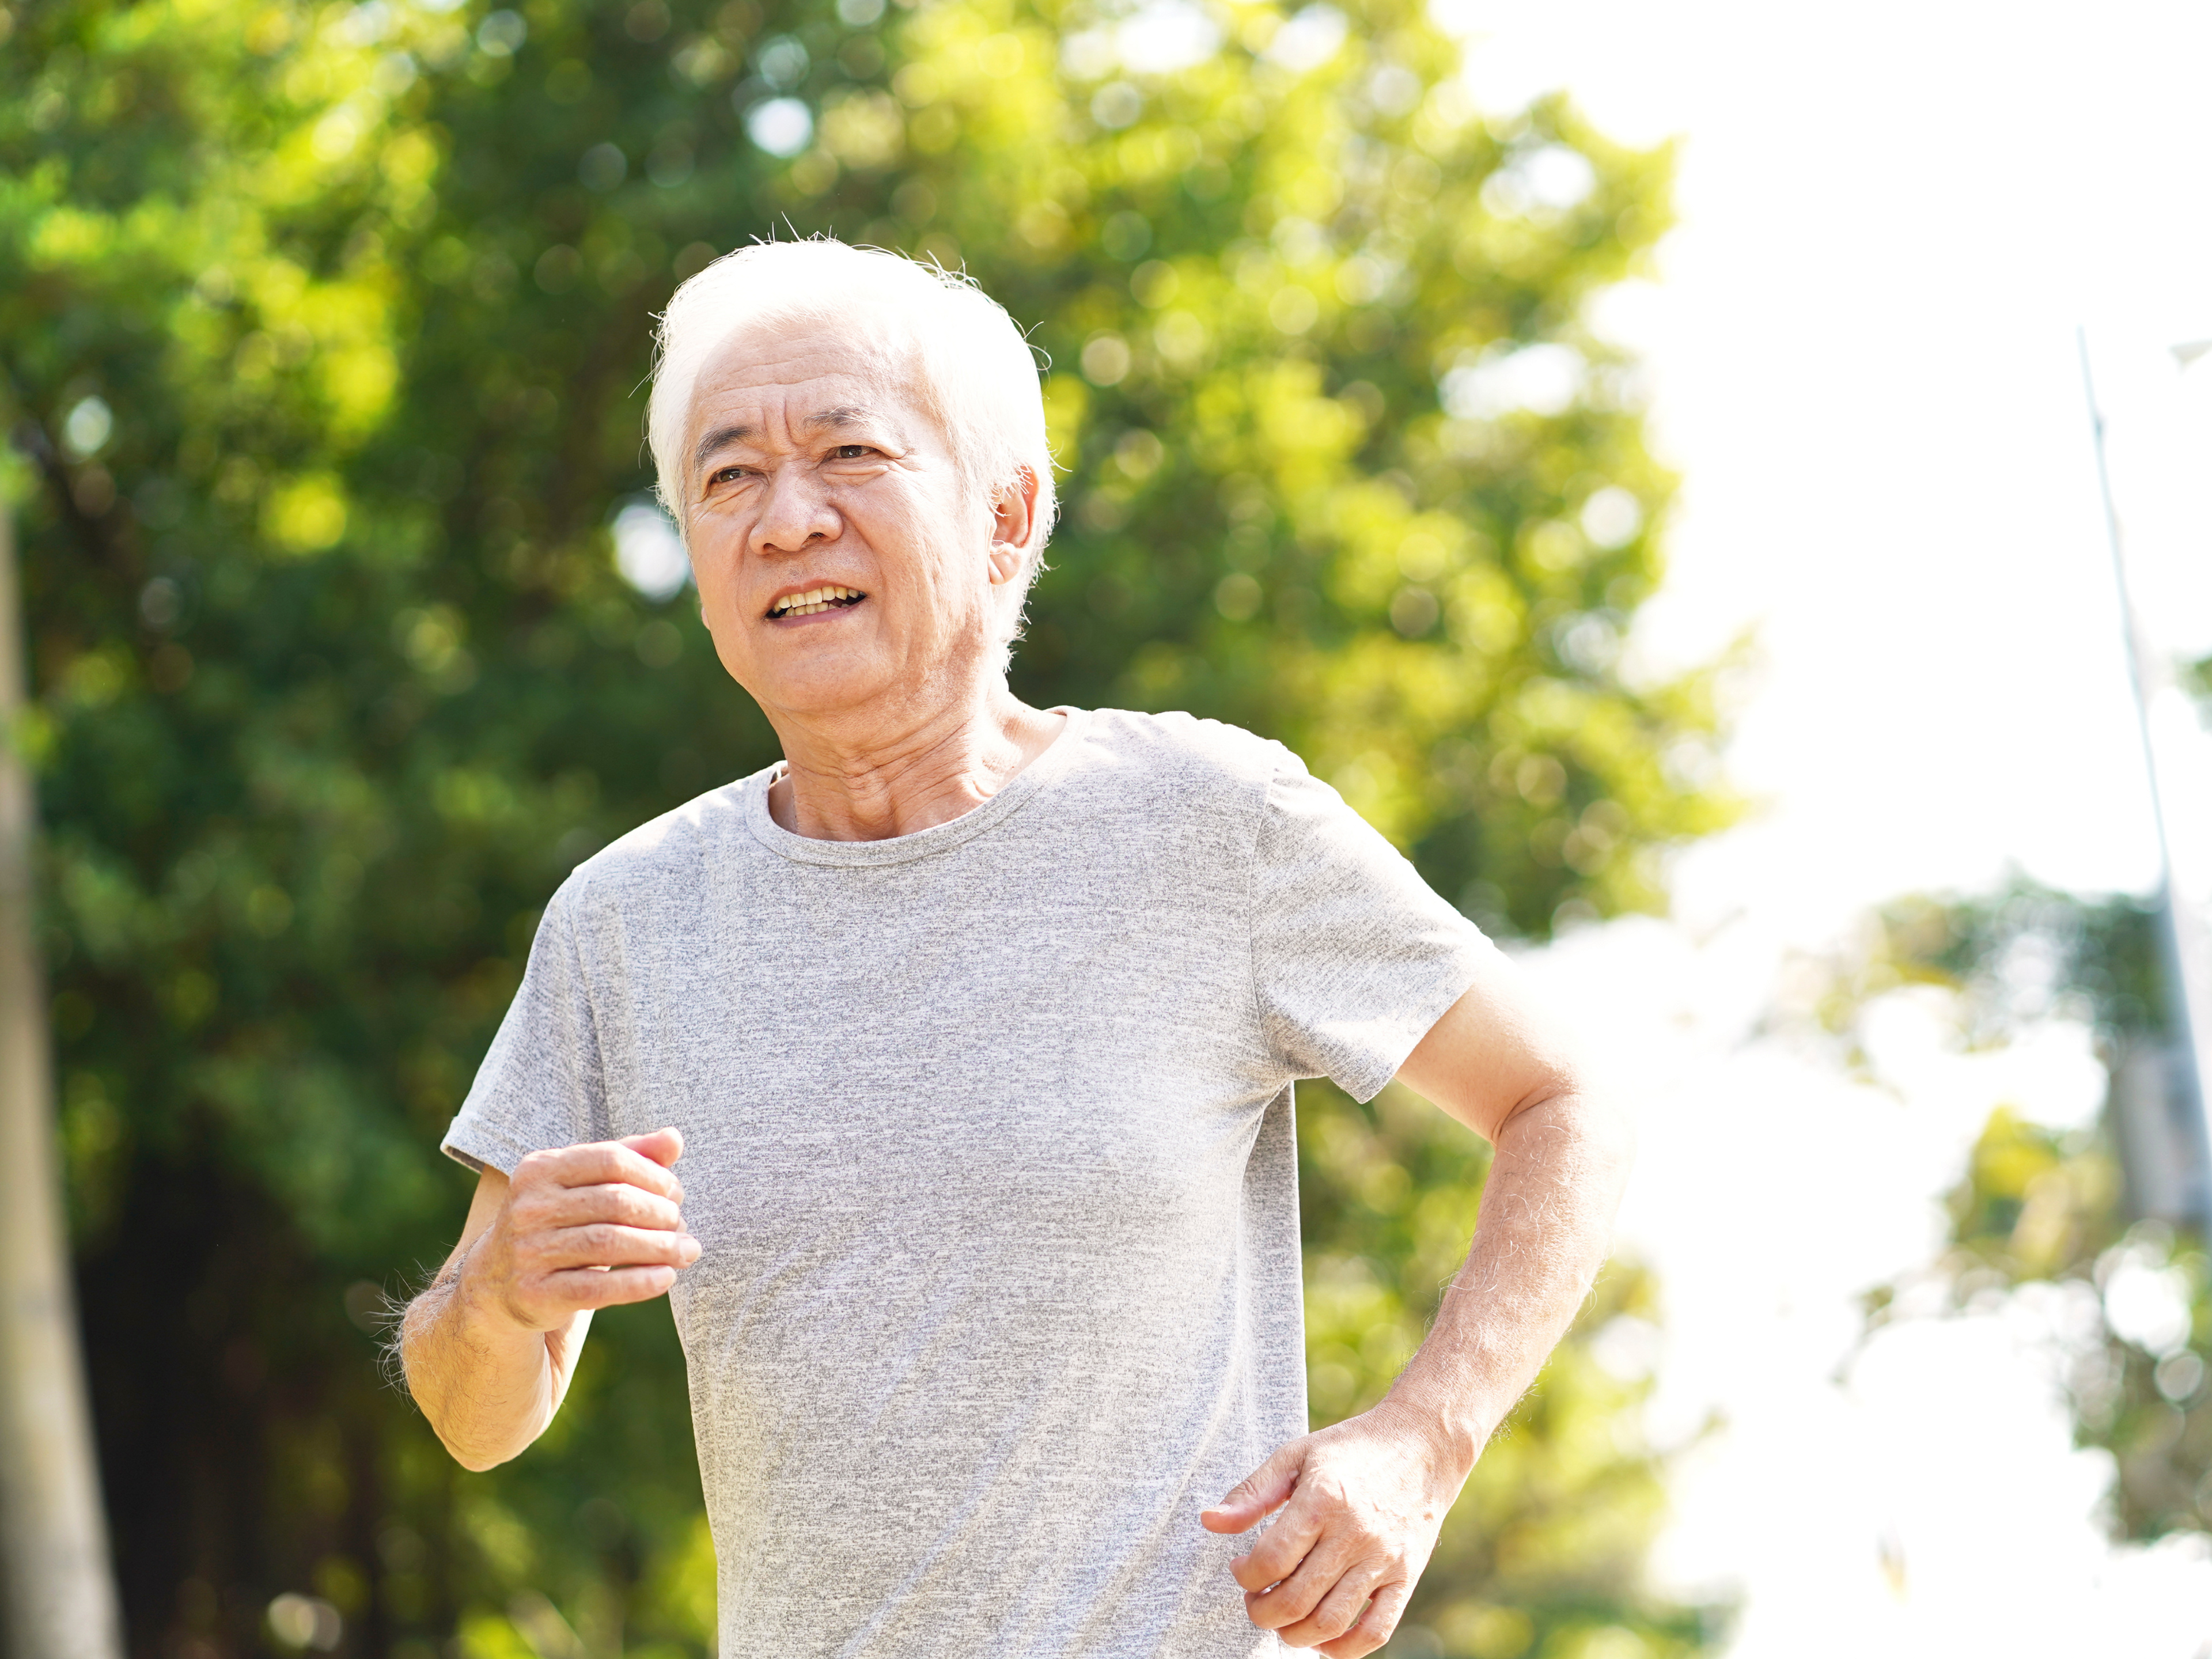 Old man runs to improve his tendon health and to prevent patellar tendonitis.